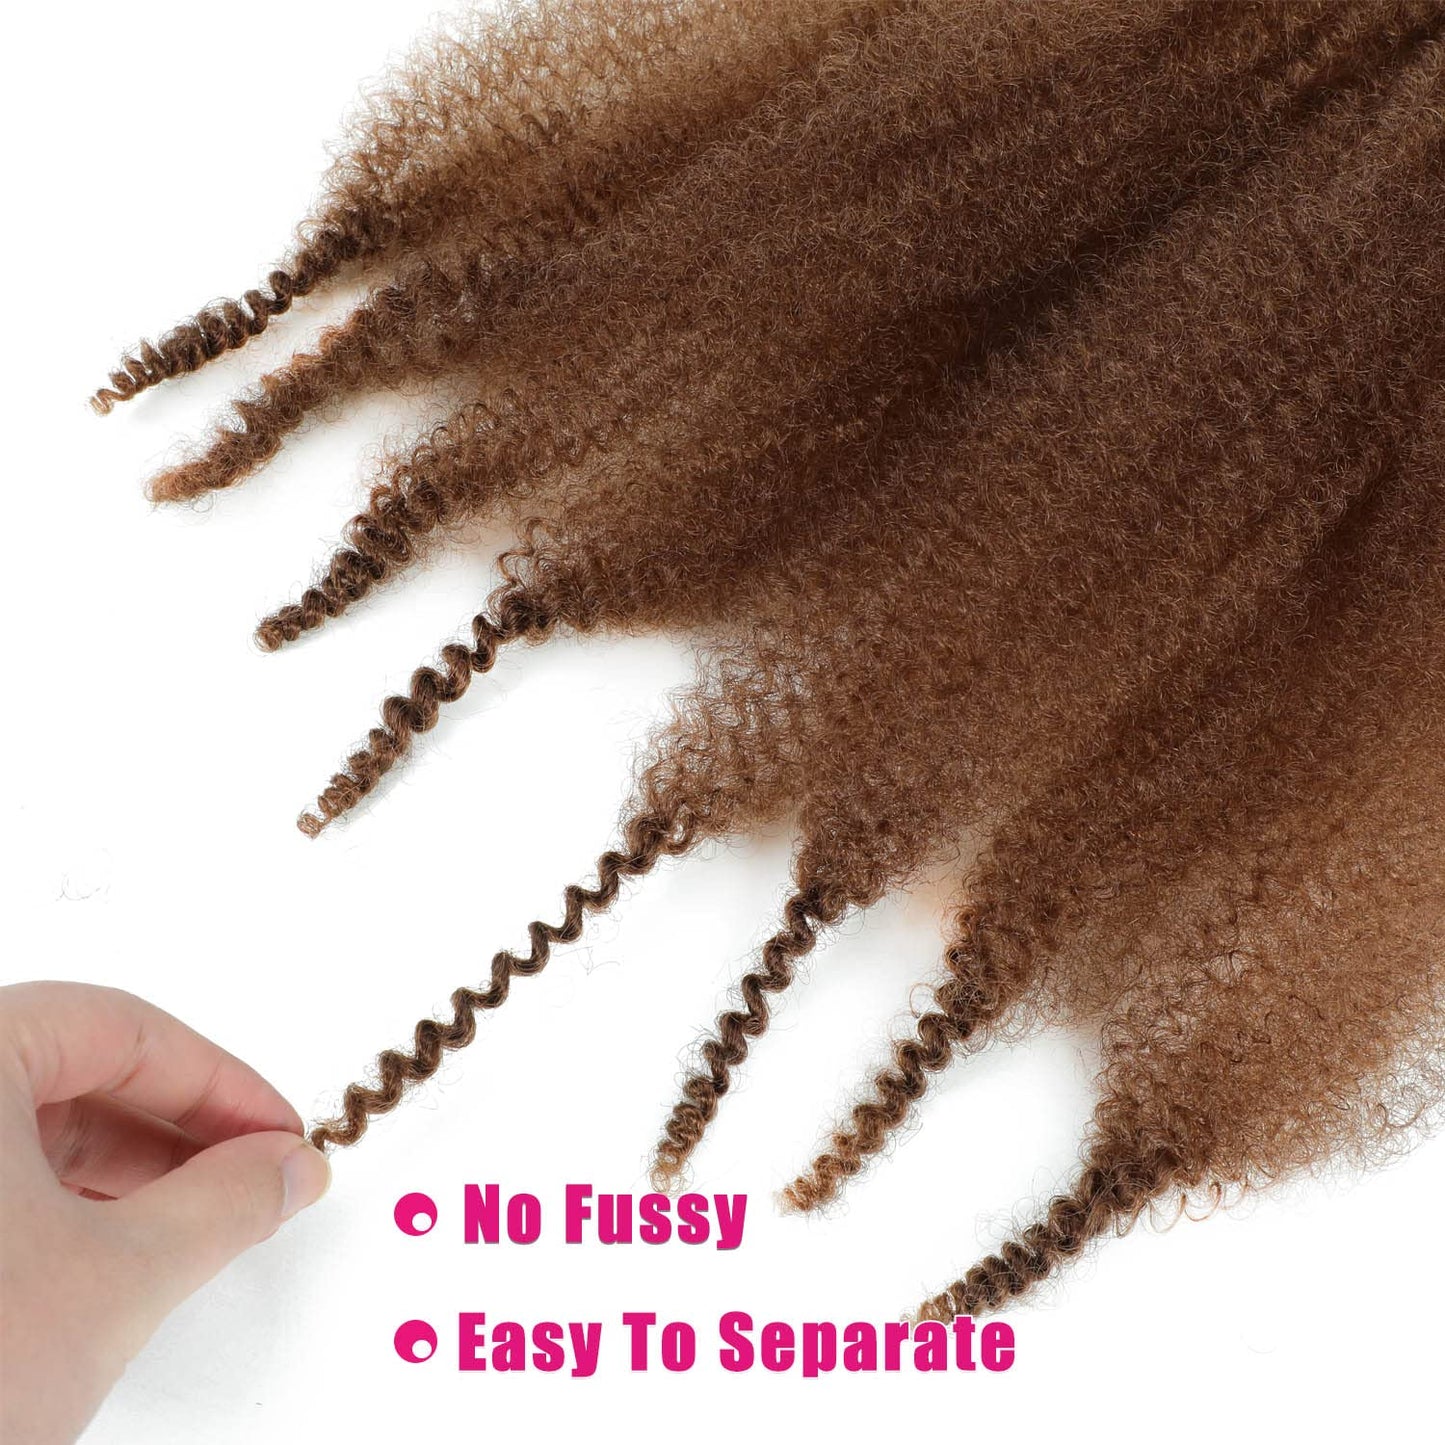 Afro Twist Hair 24 Inch 3 Packs, Springy Afro Twist Hair Pre Fluffed Spring Twist Hair Pre Stretched Wrapping Hair for Soft Locs Hair Extensions (24 Inch (Pack of 3), 30#)